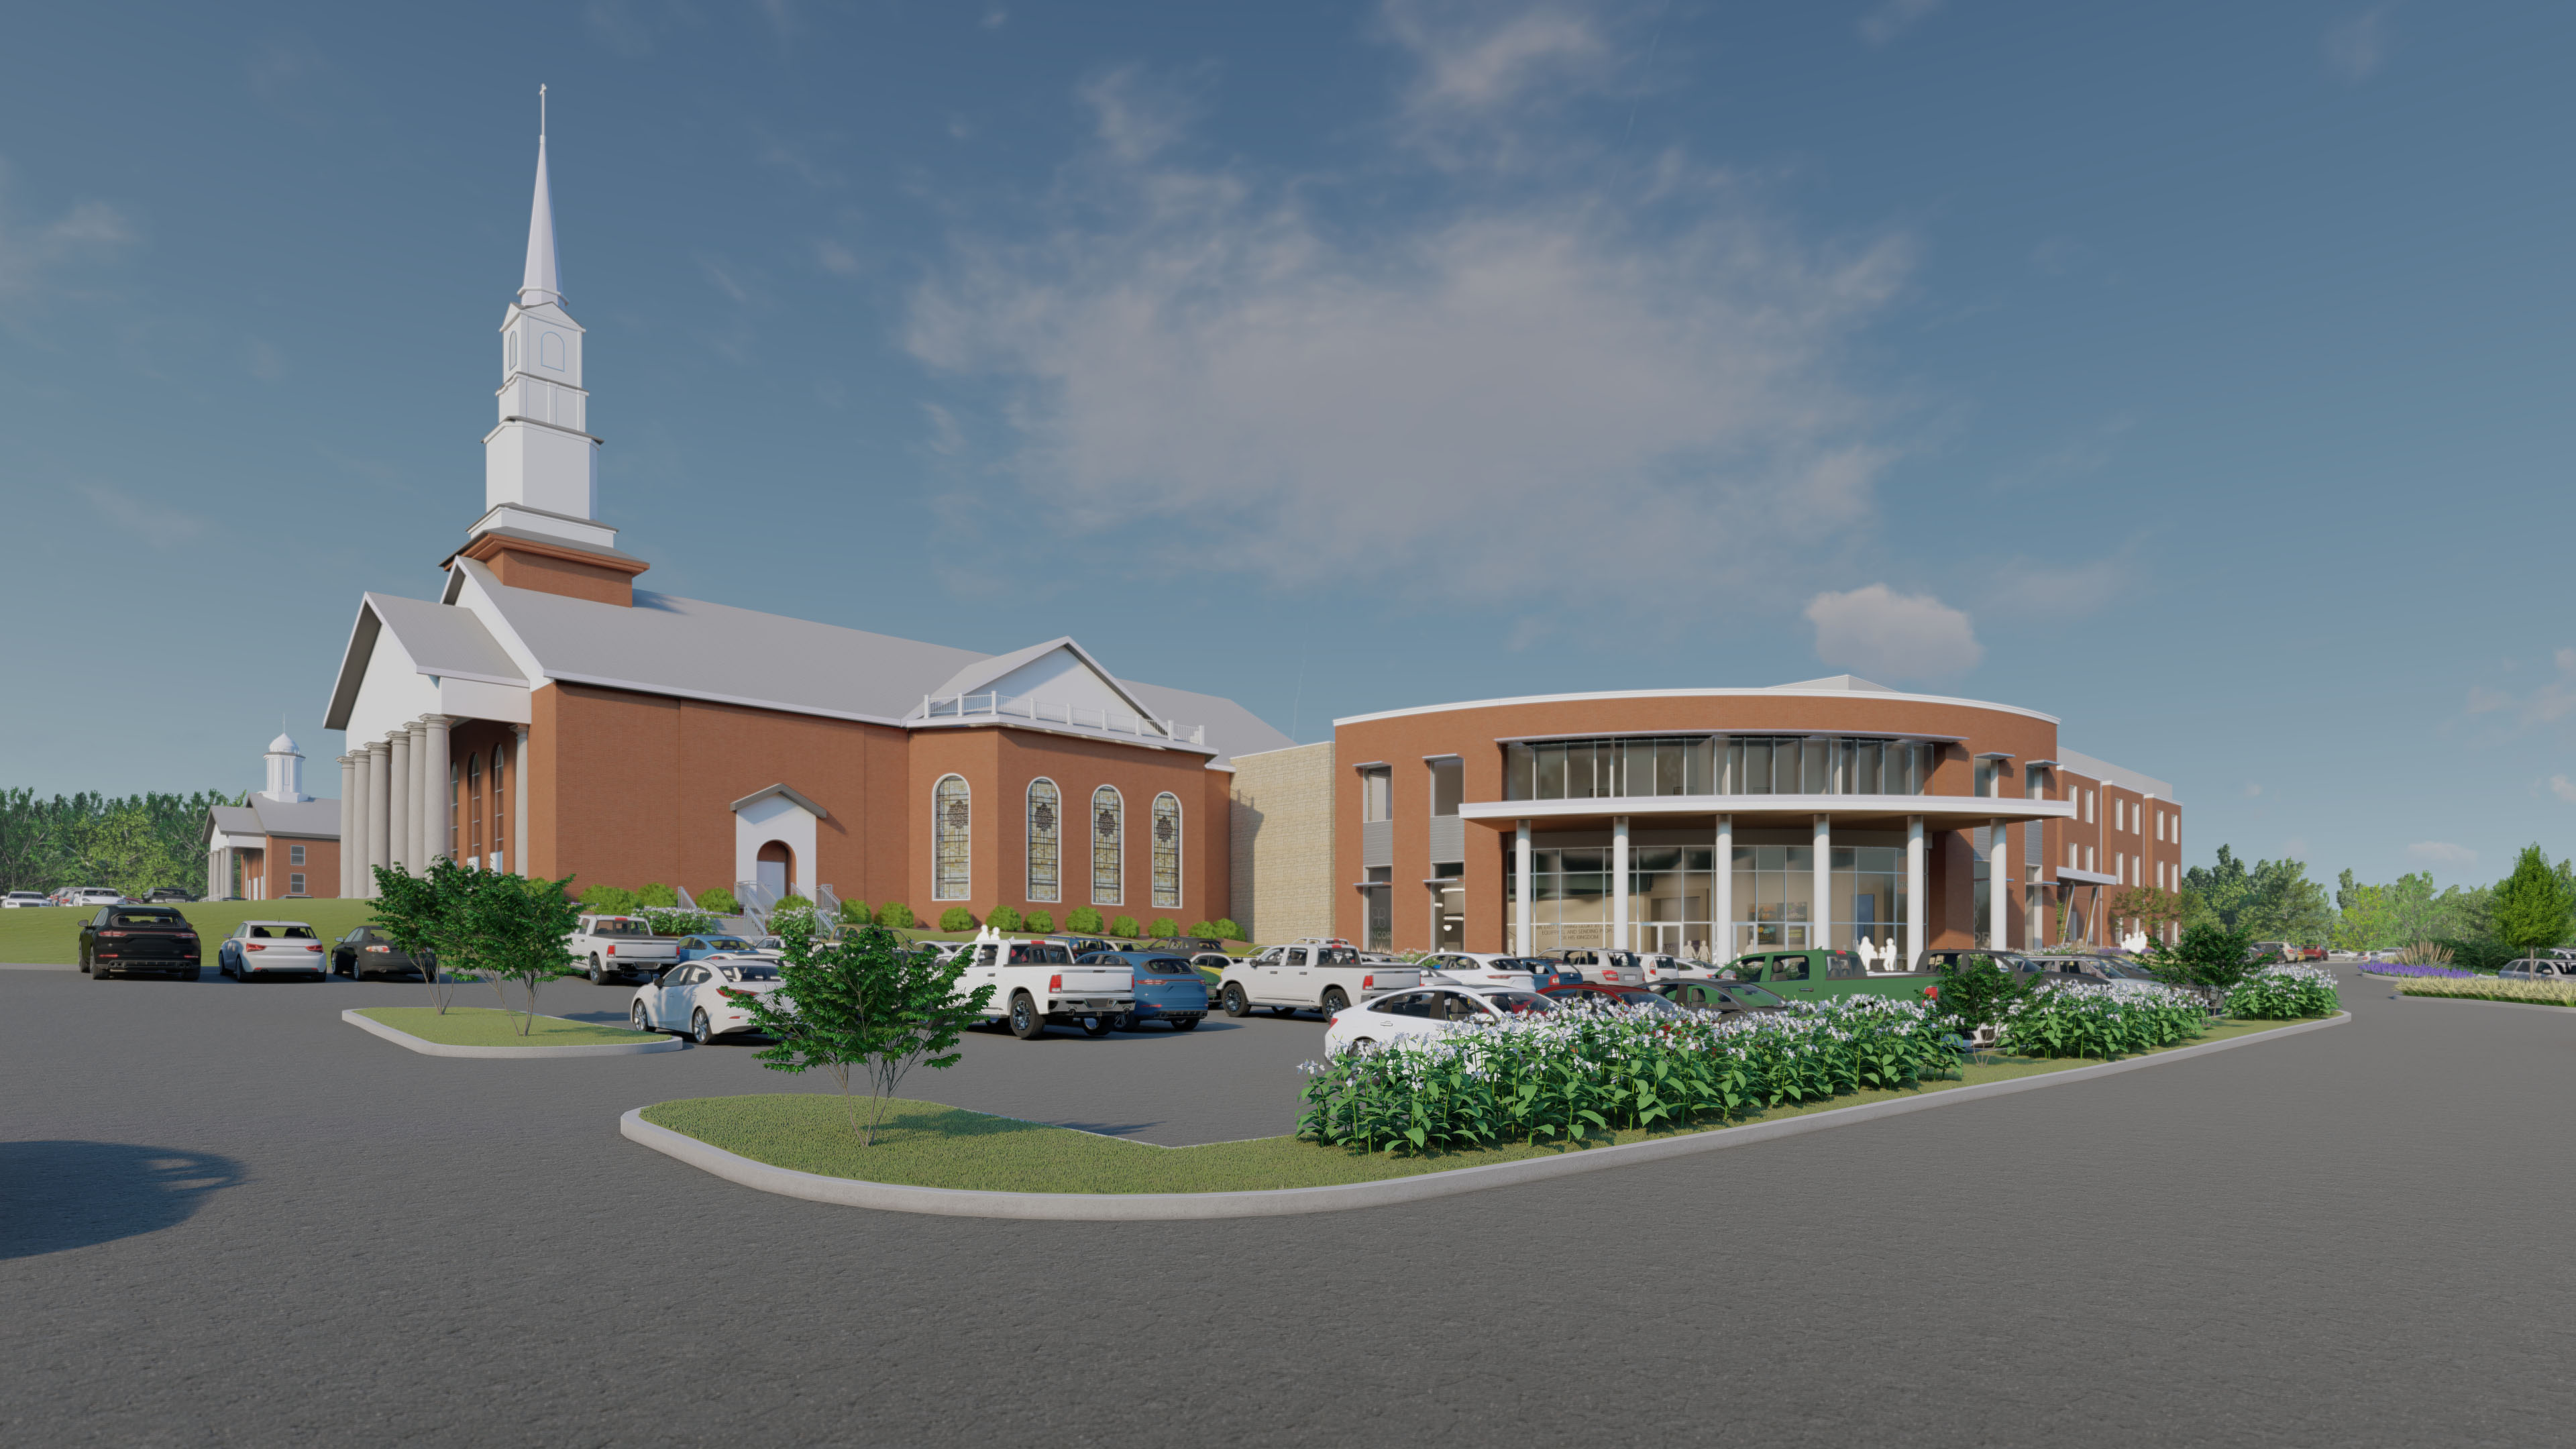 Concord Baptist Church - South-Facing Overall Exterior Rendering